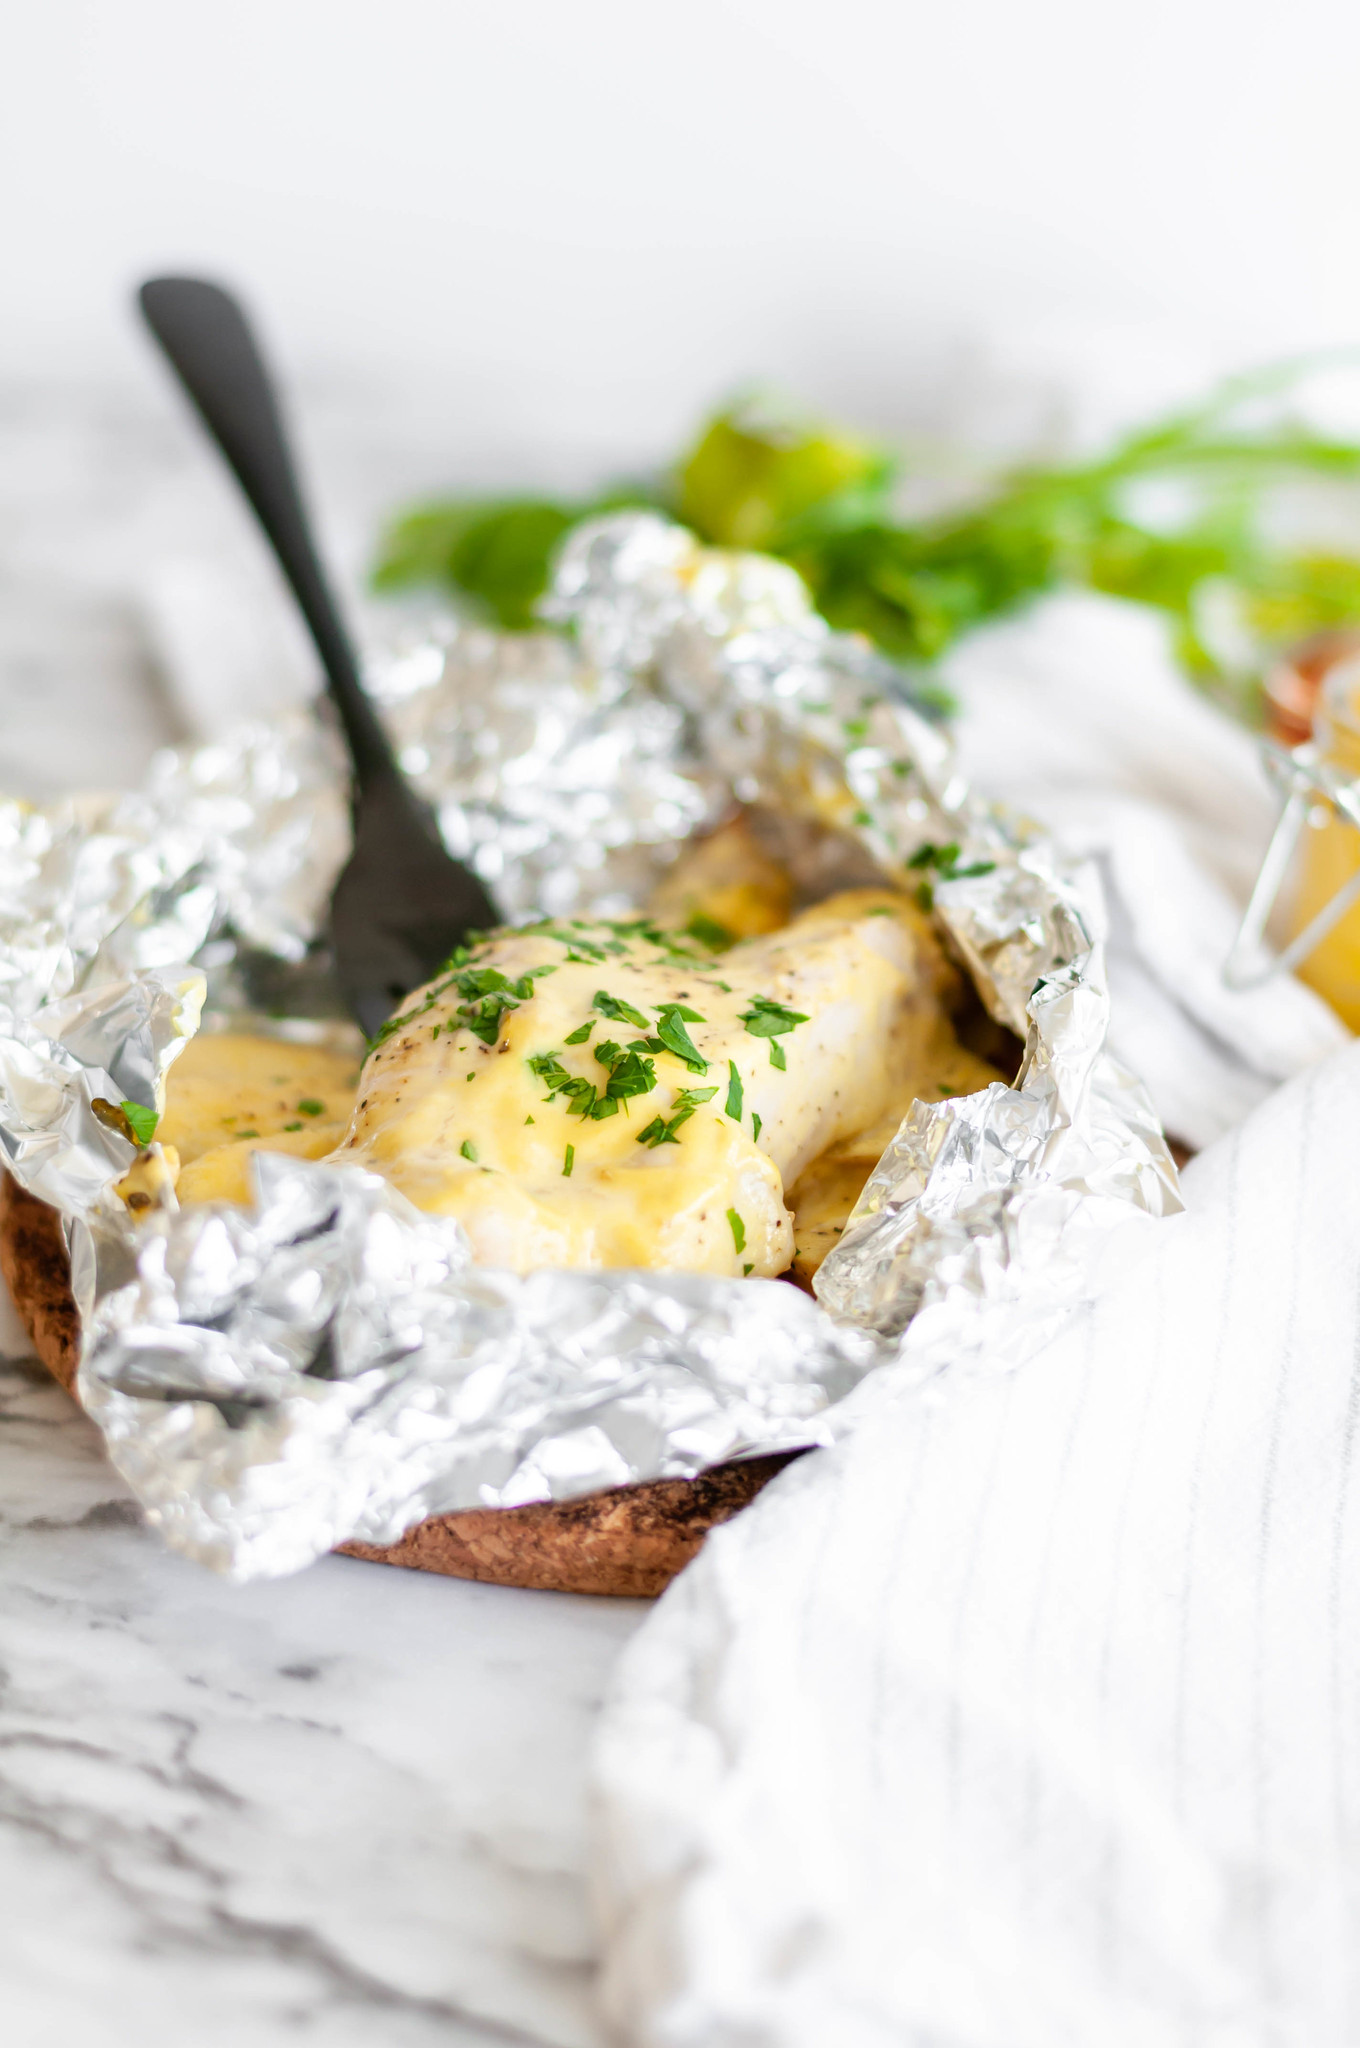 Honey Mustard Chicken and Potato Foil Packs are a simple weeknight dinner the whole family will love. Chicken breasts, thinly sliced potatoes and a simple homemade honey mustard sauce.